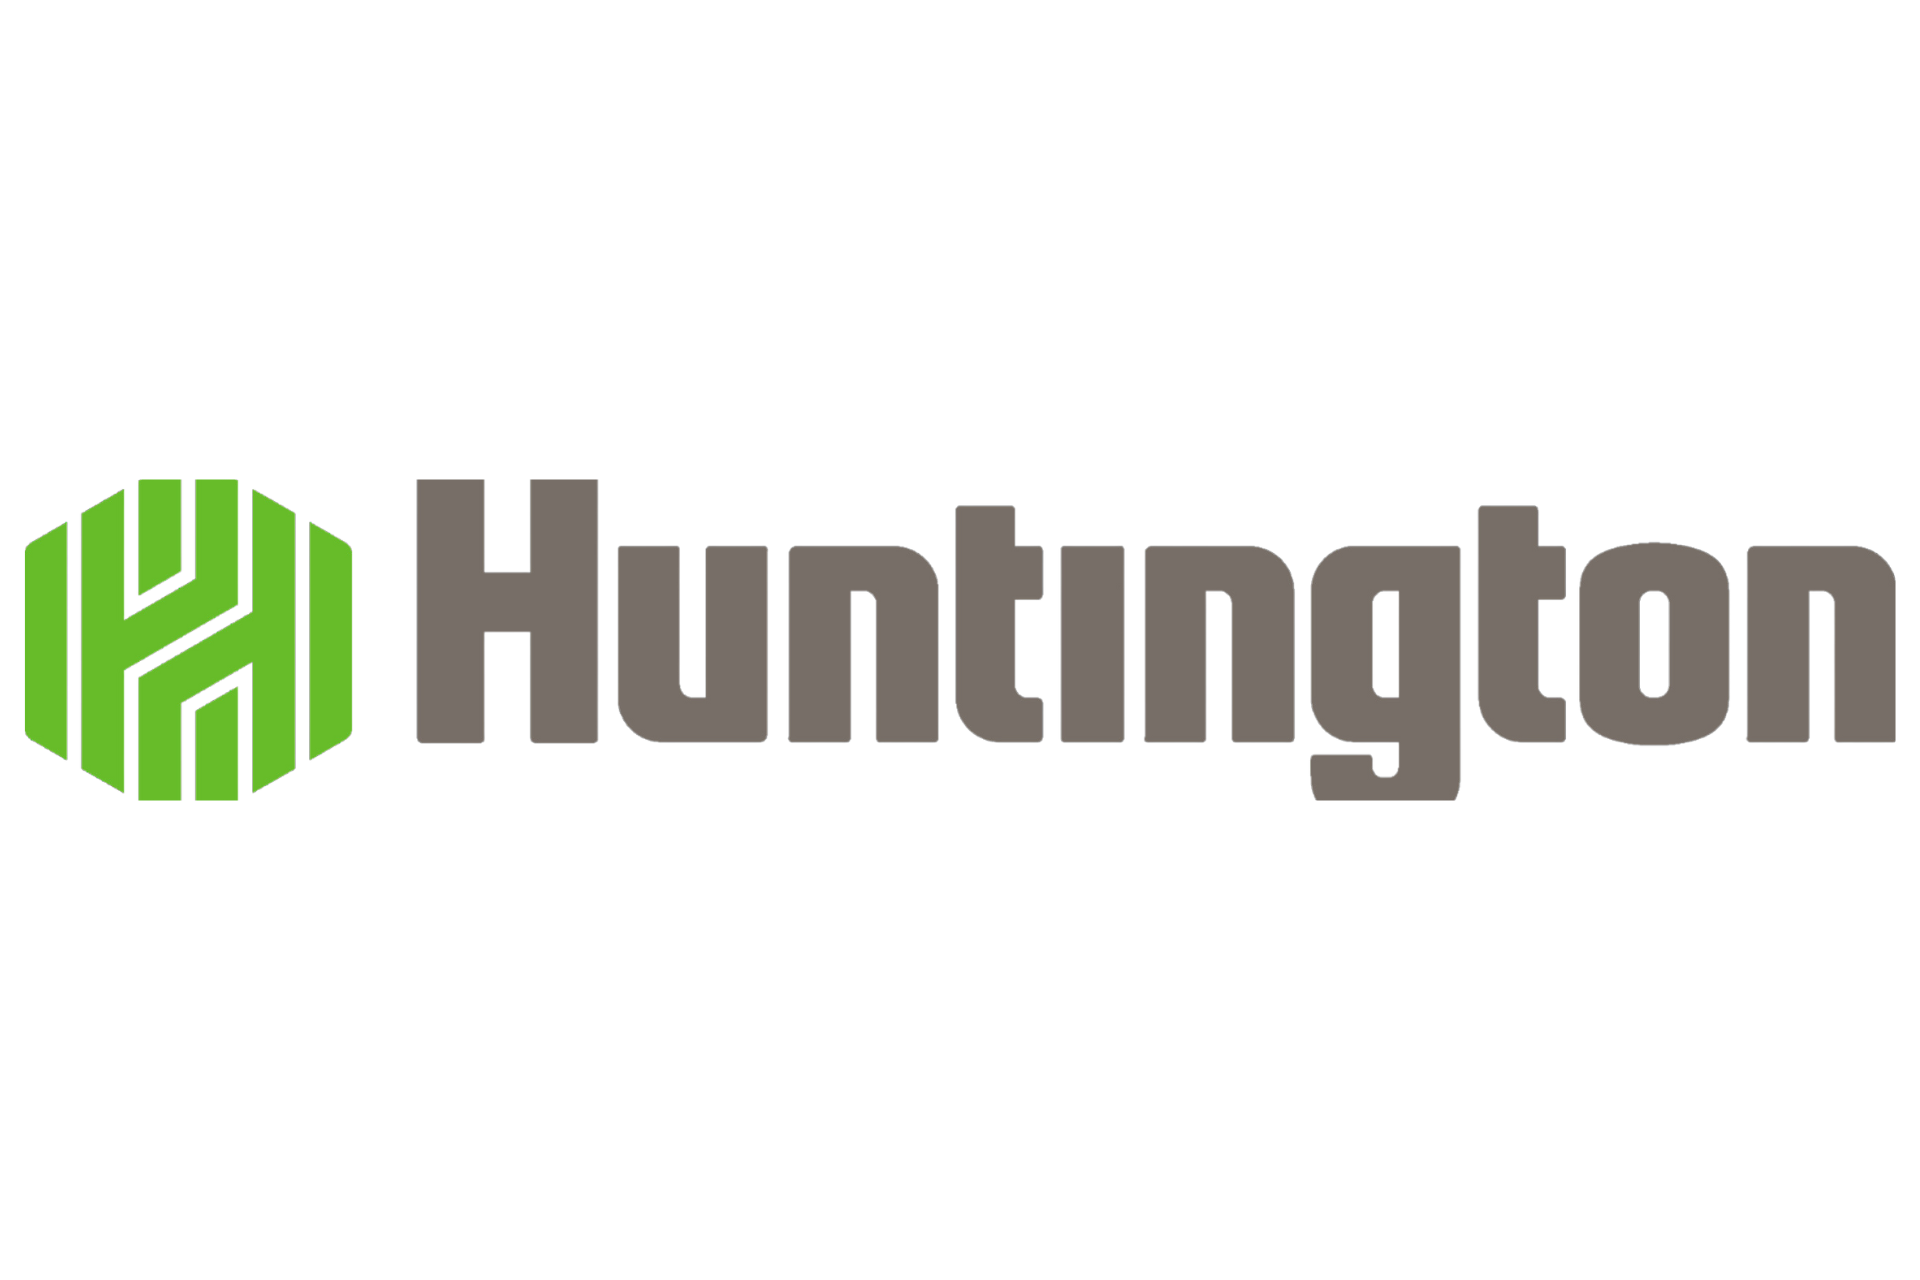 The logo for huntington is green and gray on a white background.